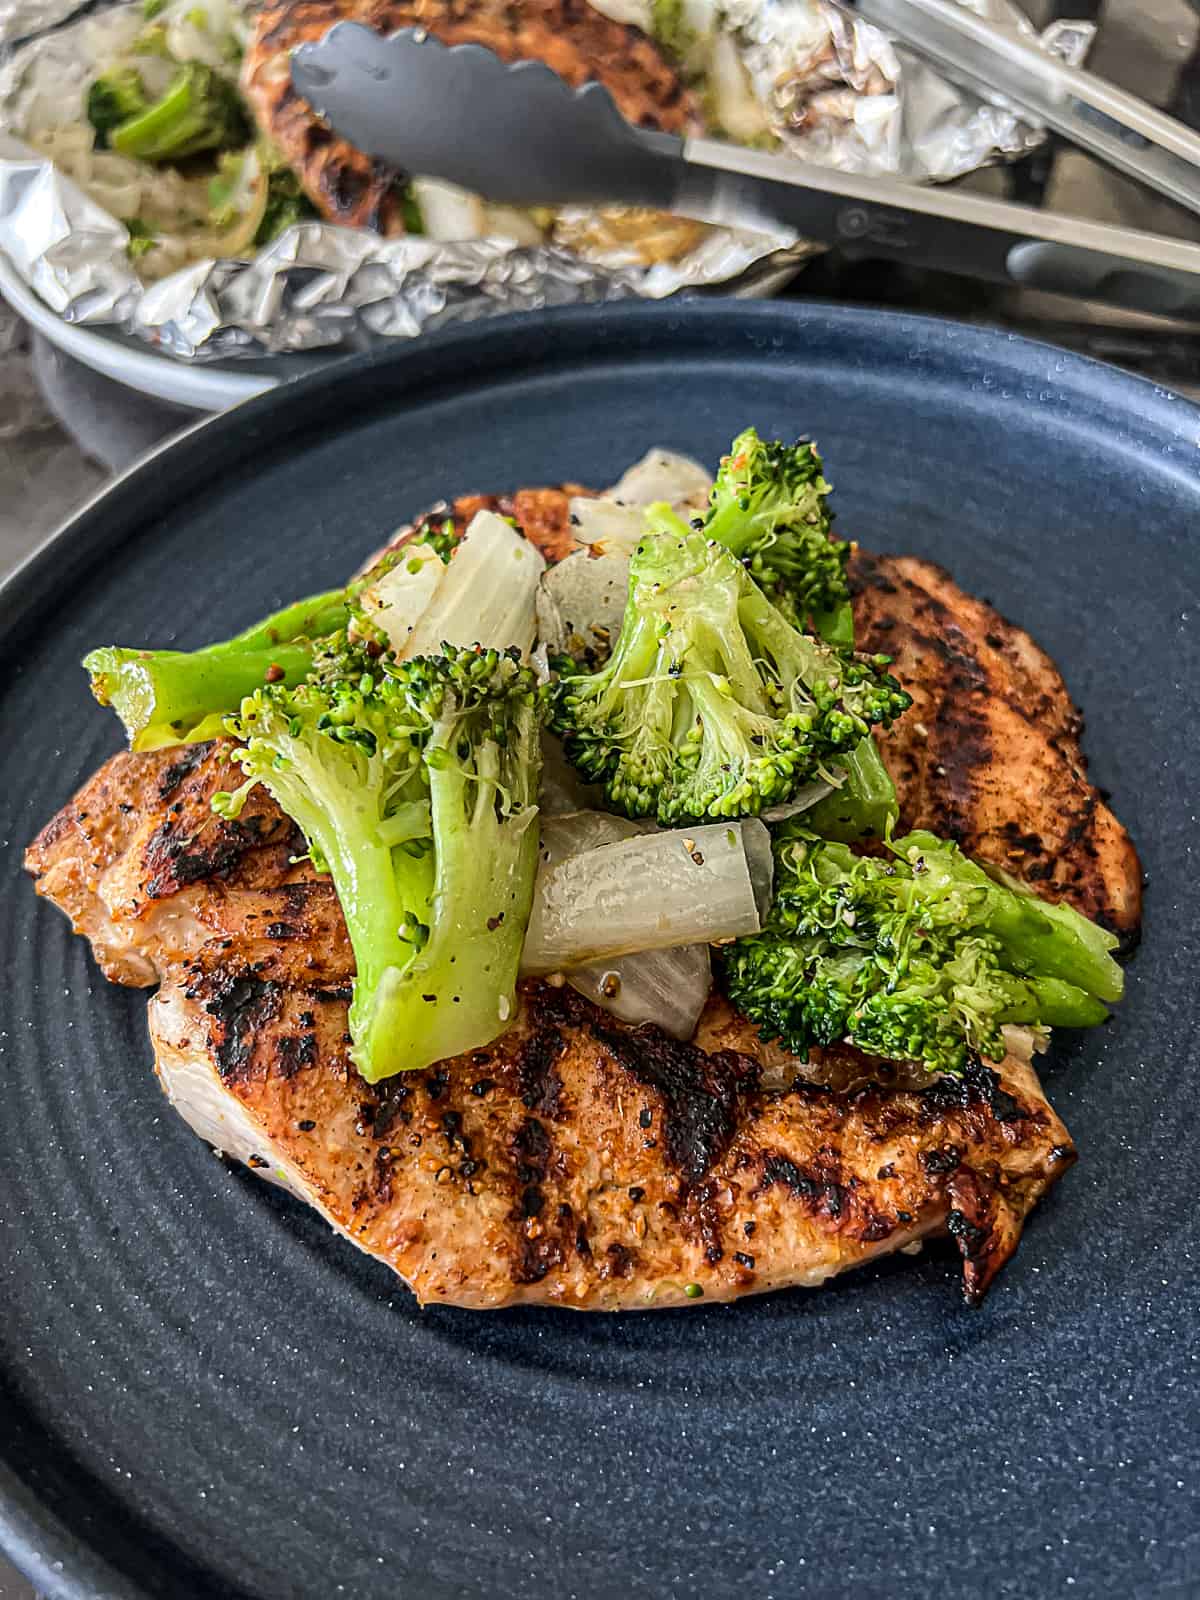 Grilled Dinner With Chicken And Broccoli Onions Side Dish